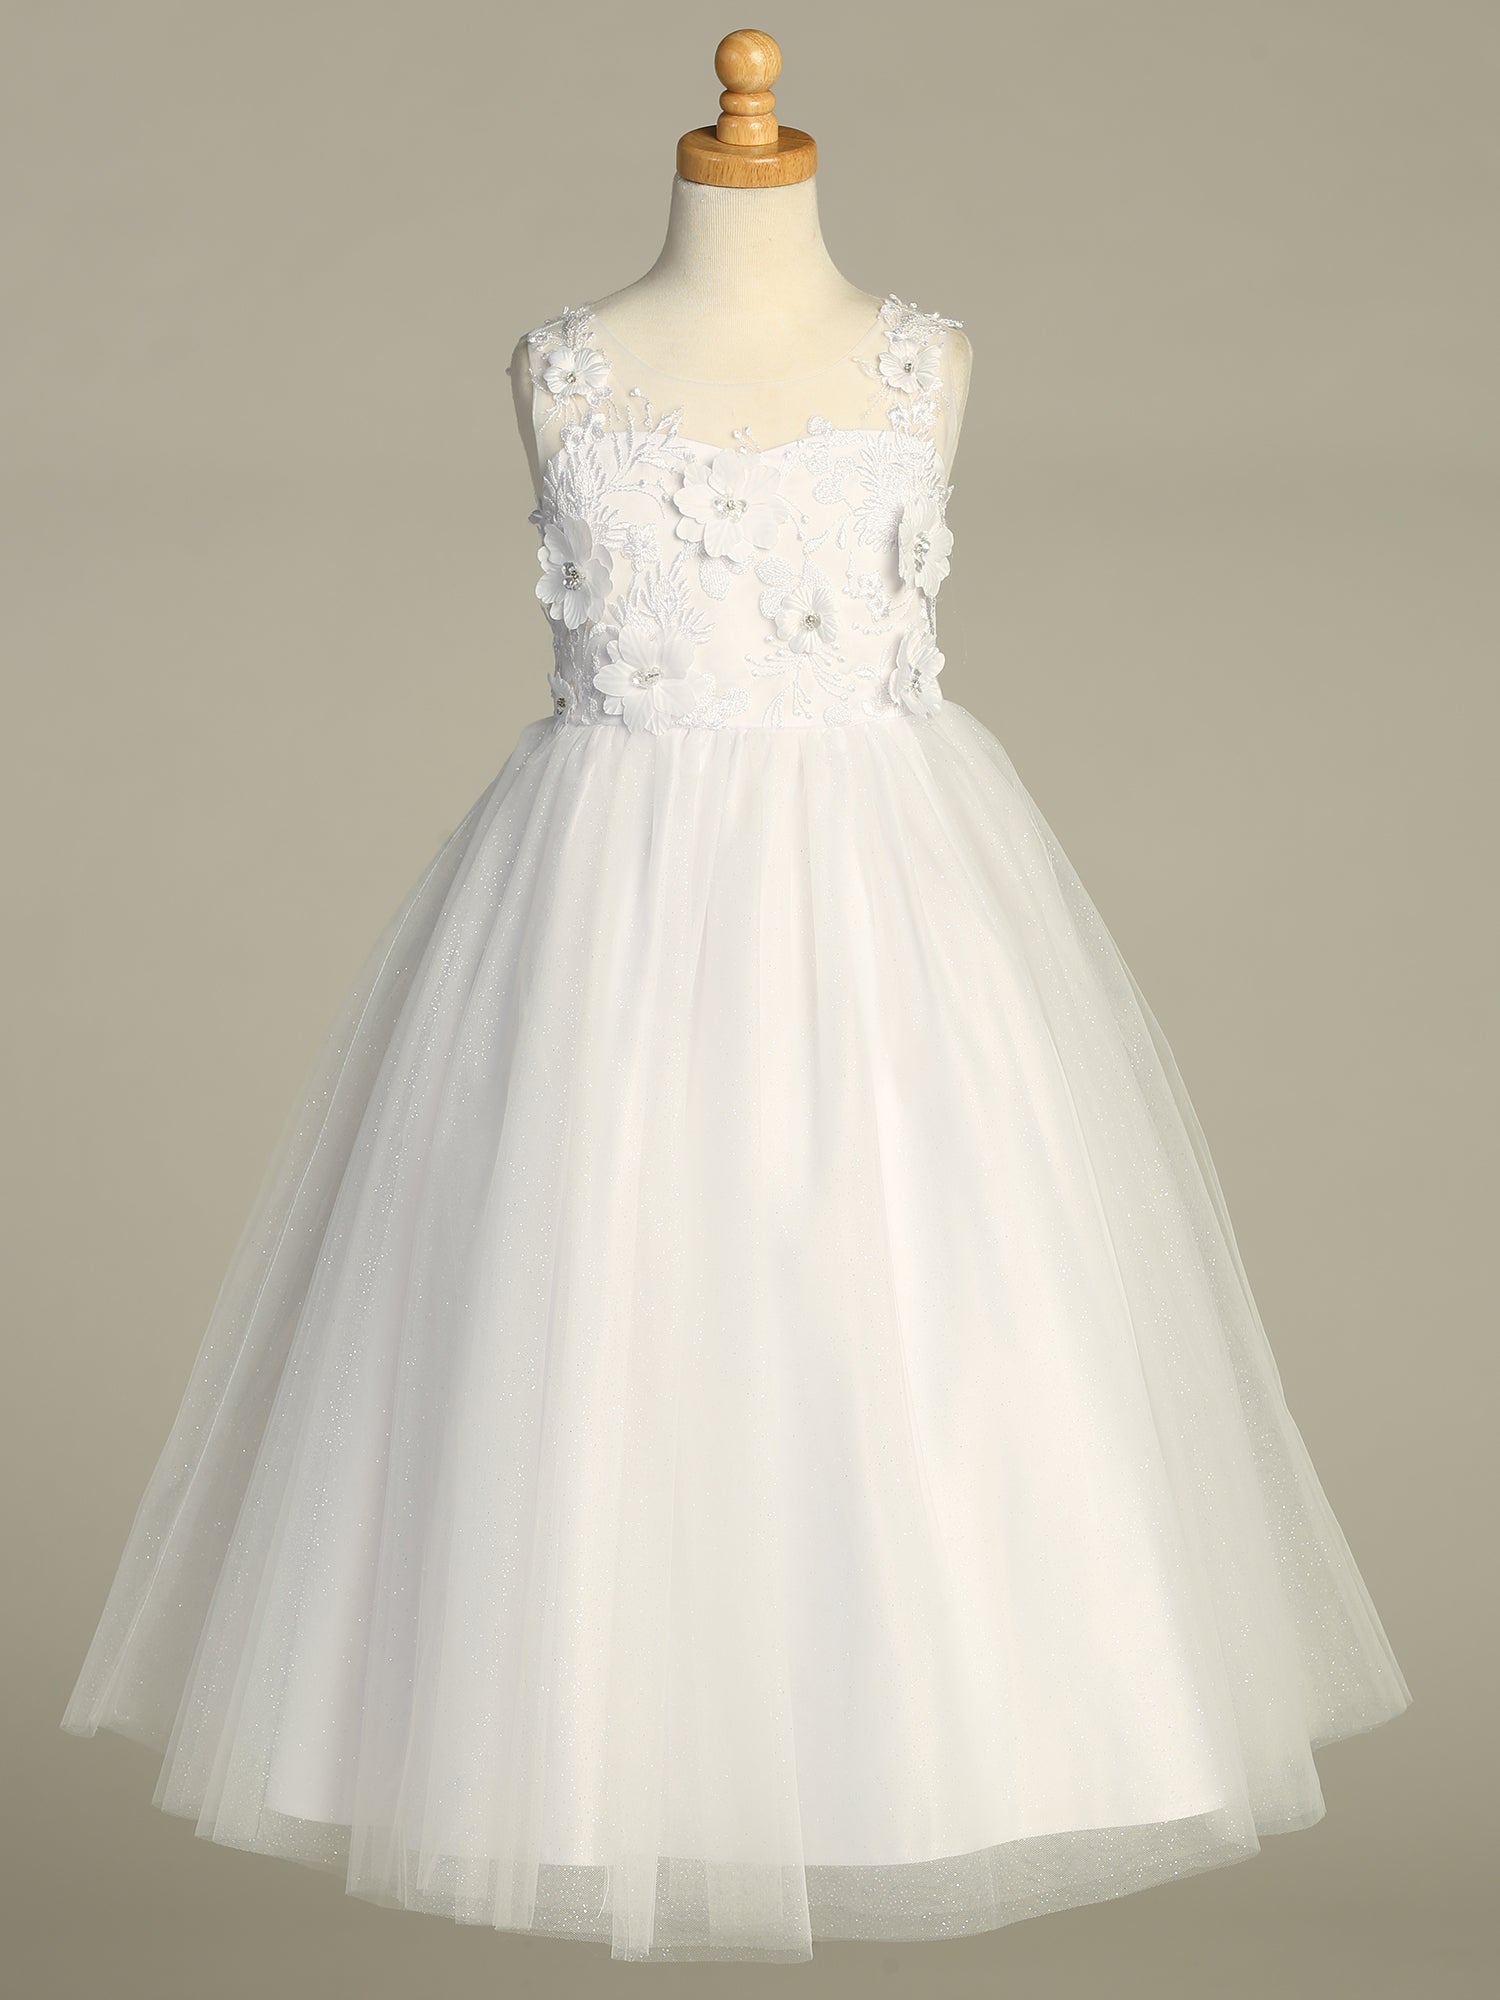 Back view of the First Communion Dress showing the zipper and tie-back tulle sash closure.